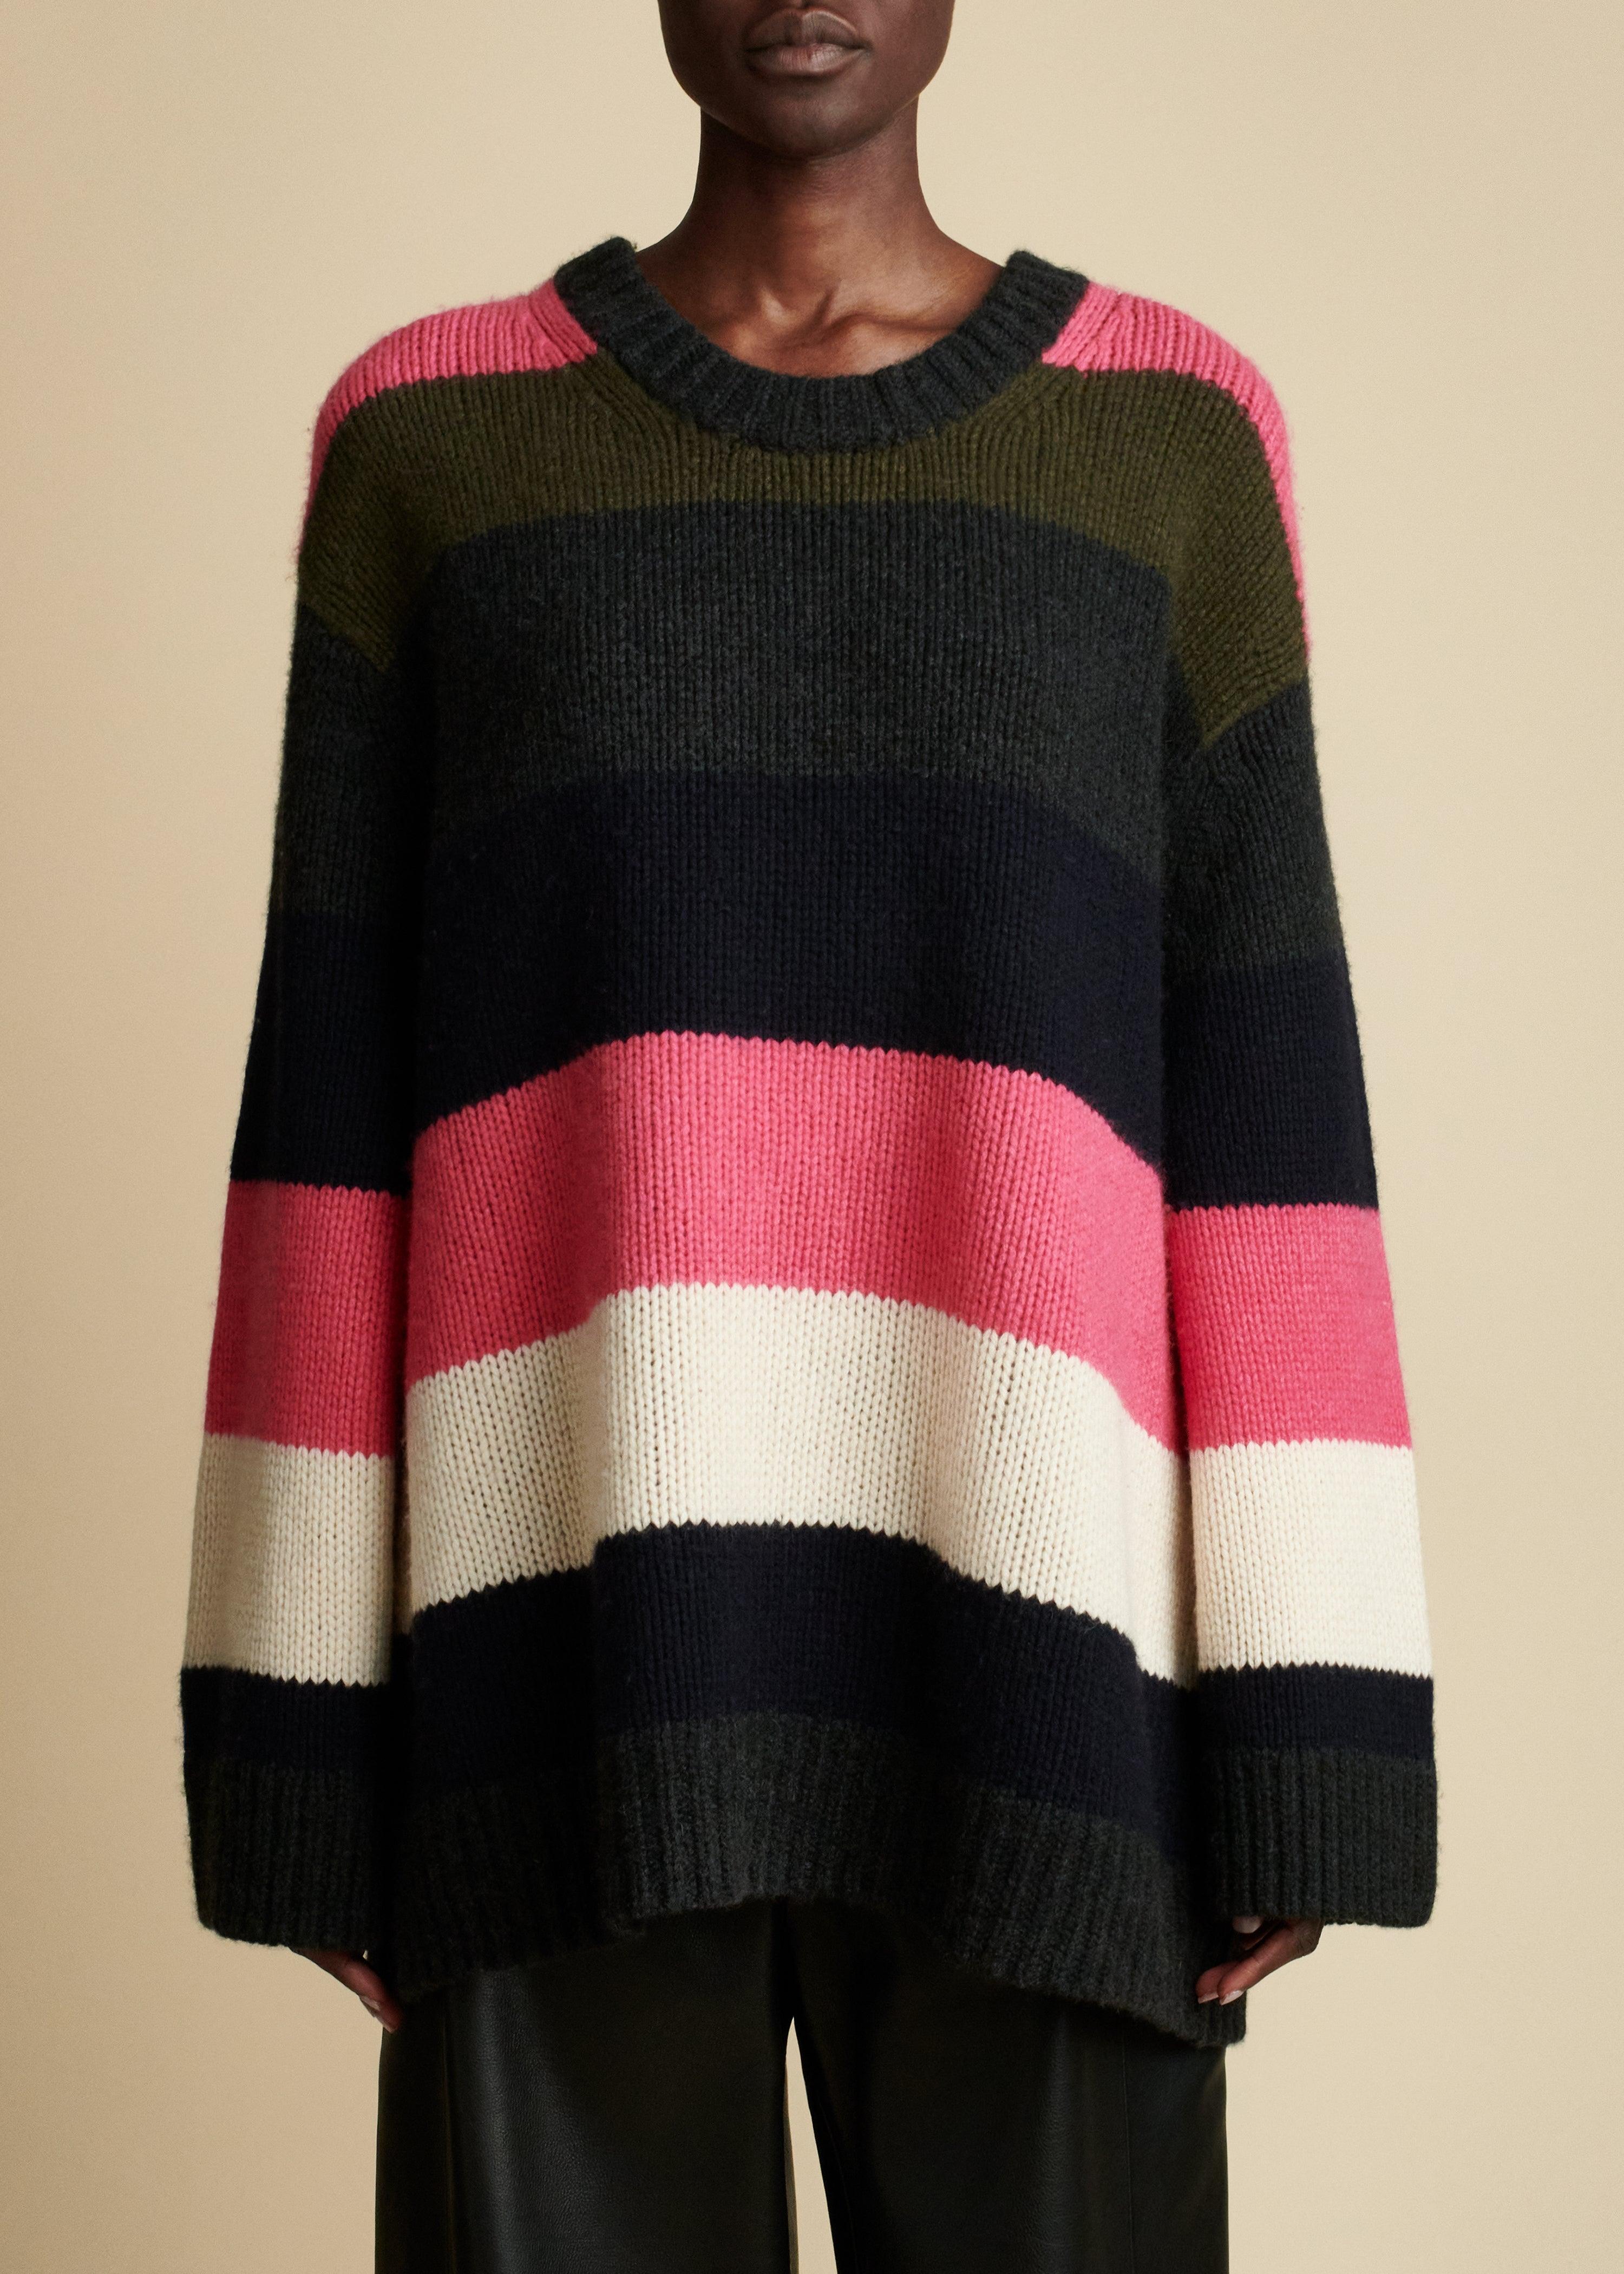 The Jade Sweater in Pink Multicolor Stripe - The Iconic Issue